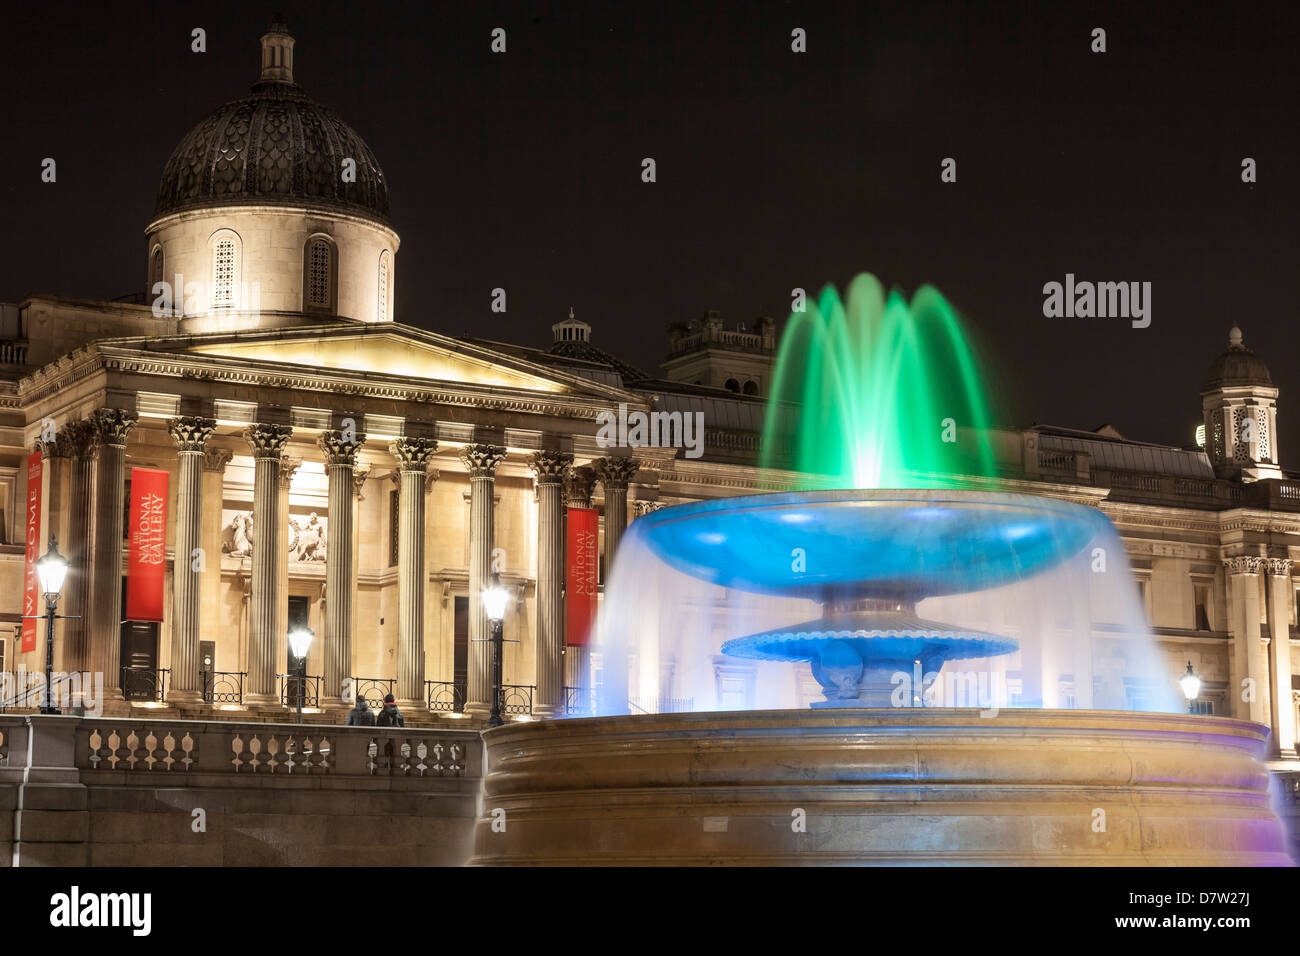 The National Gallery and fountain in Trafalgar Square at night, London, England, United Kingdom Stock Photo